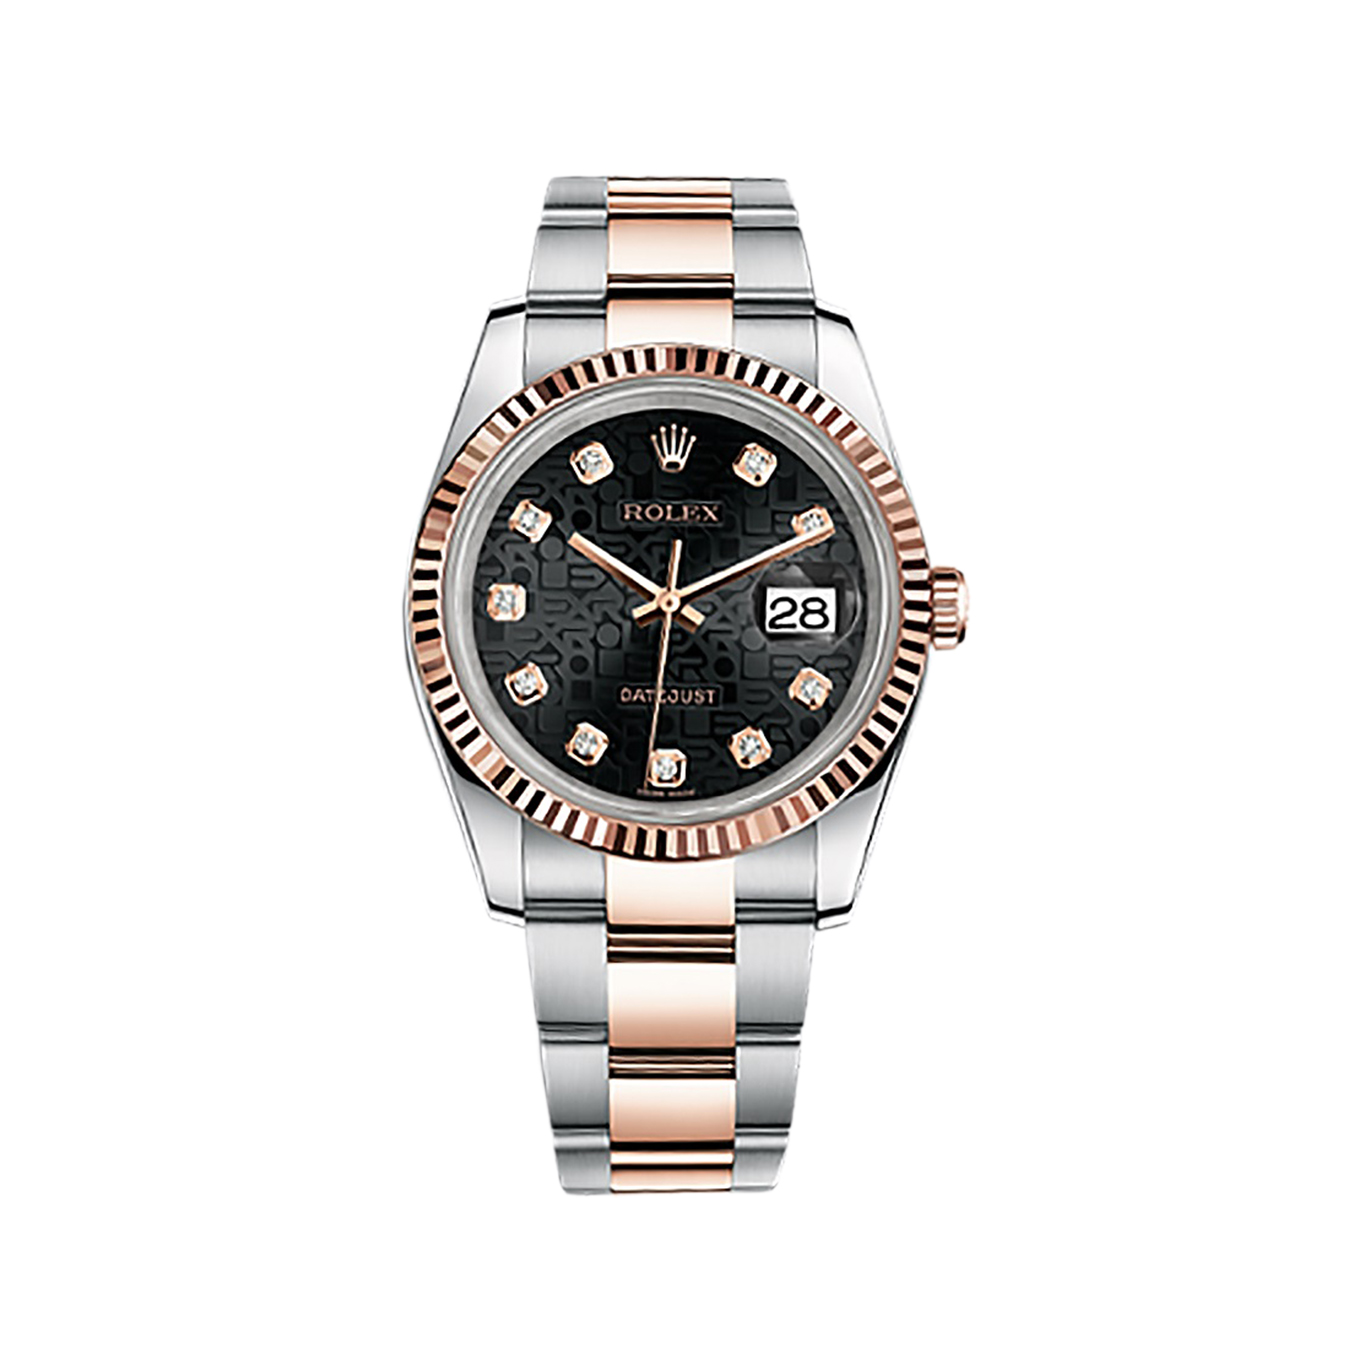 Datejust 36 116231 Rose Gold & Stainless Steel Watch (Black Jubilee Design Set with Diamonds)